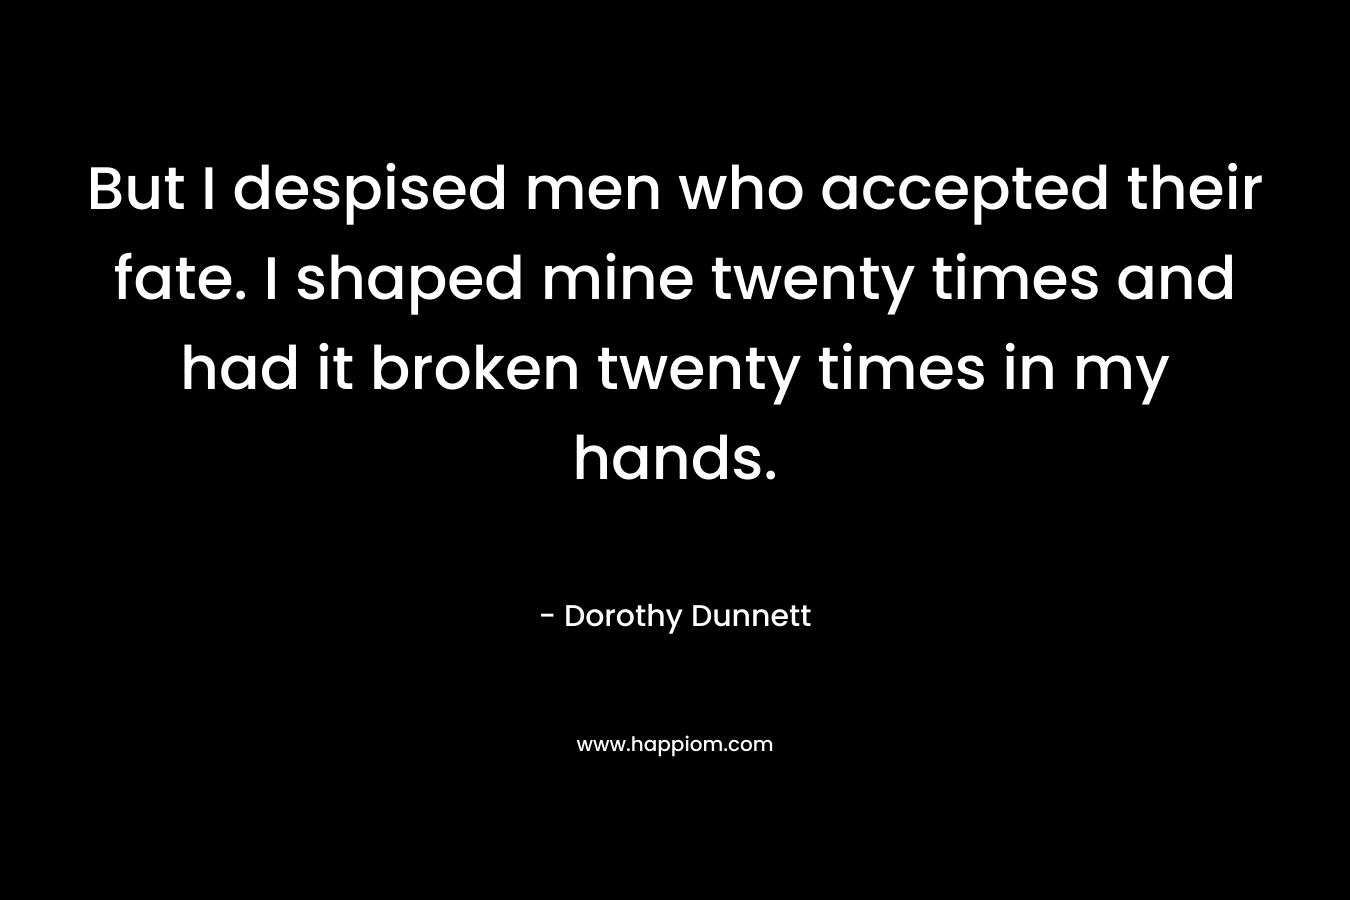 But I despised men who accepted their fate. I shaped mine twenty times and had it broken twenty times in my hands.